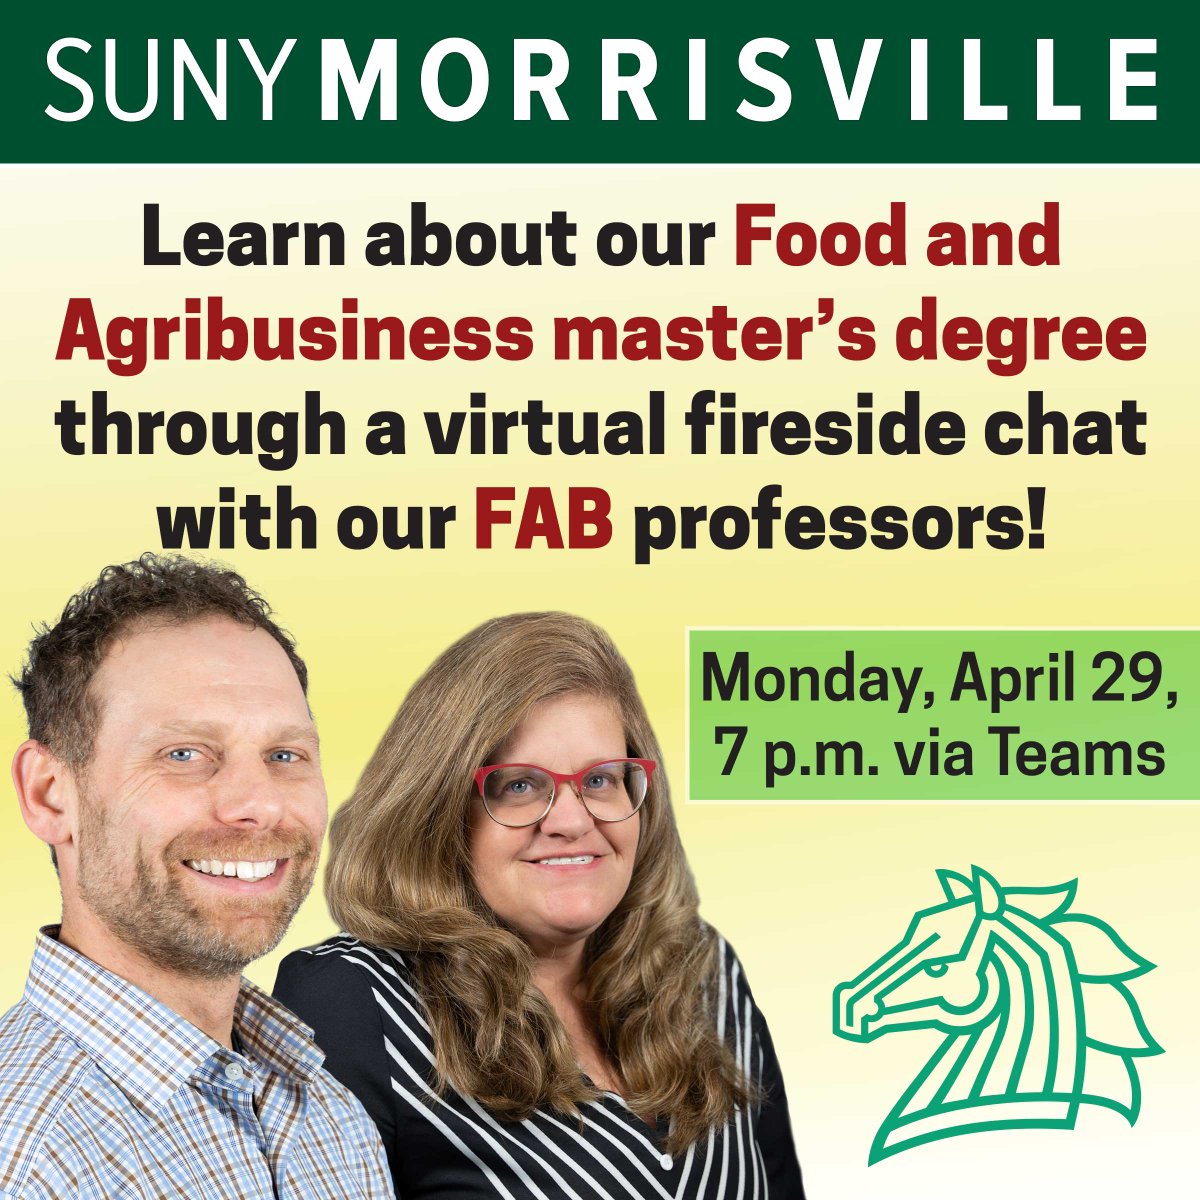 Interested in learning about our Food & Agribusiness (FAB) online master's degree? We have the event just for you! Please join us tomorrow, Monday, April 29 at 7 p.m. via Teams for a virtual fireside Q&A chat with our FAB professors! To register, visit: admissions.morrisville.edu/register/FABLi…